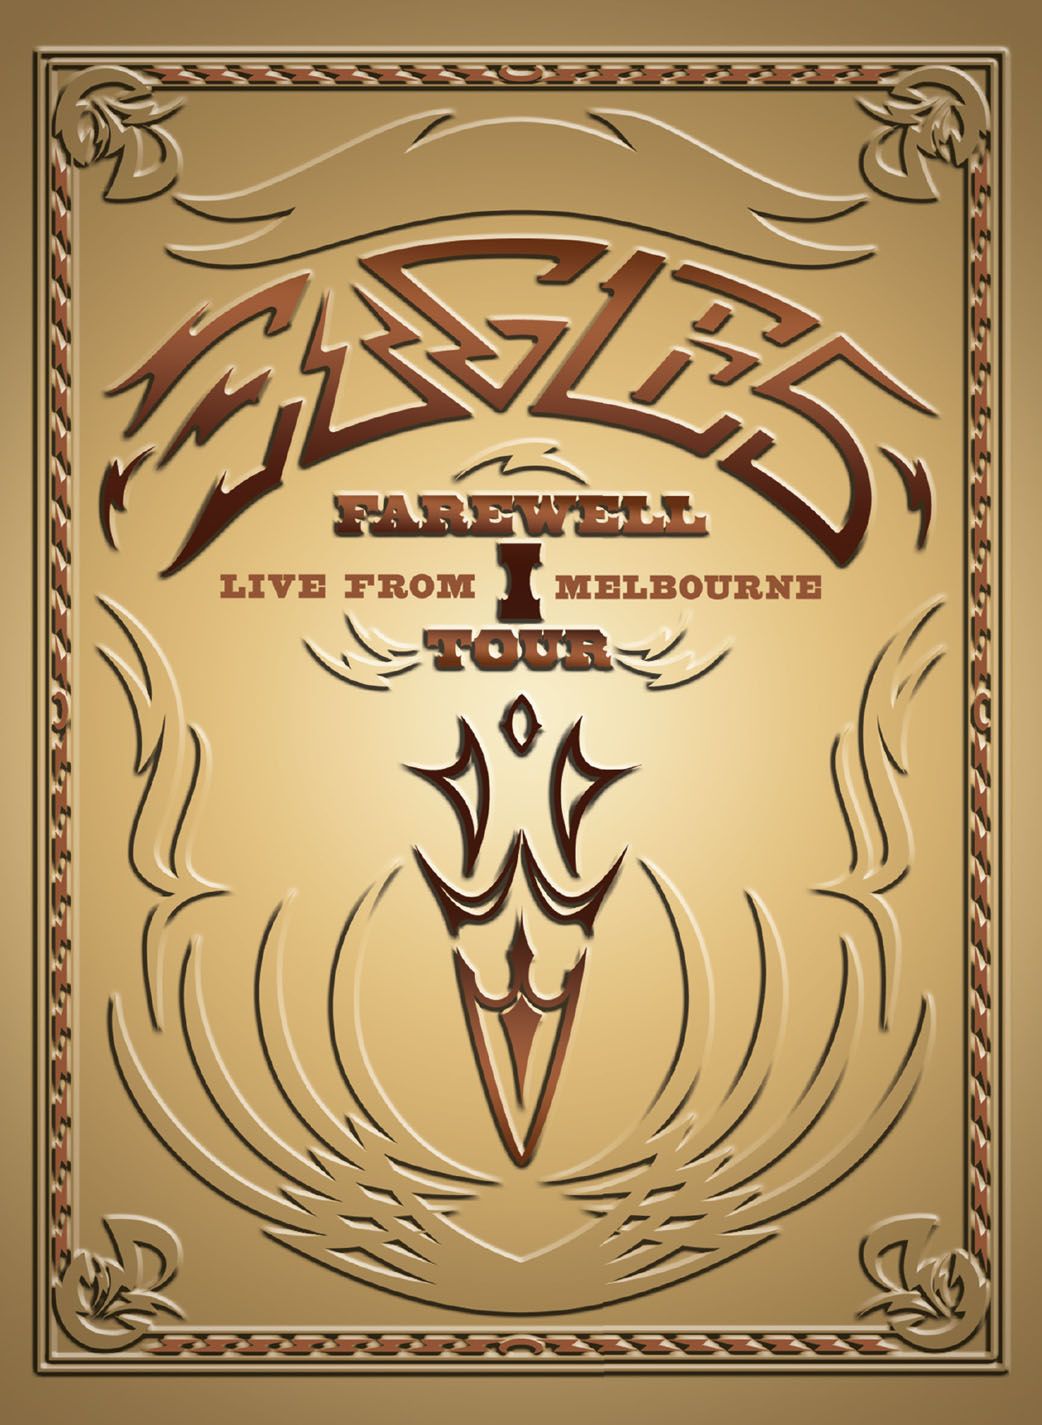 Farewell 1 Tour: Live from Melbourne [Blu-Ray] cover art